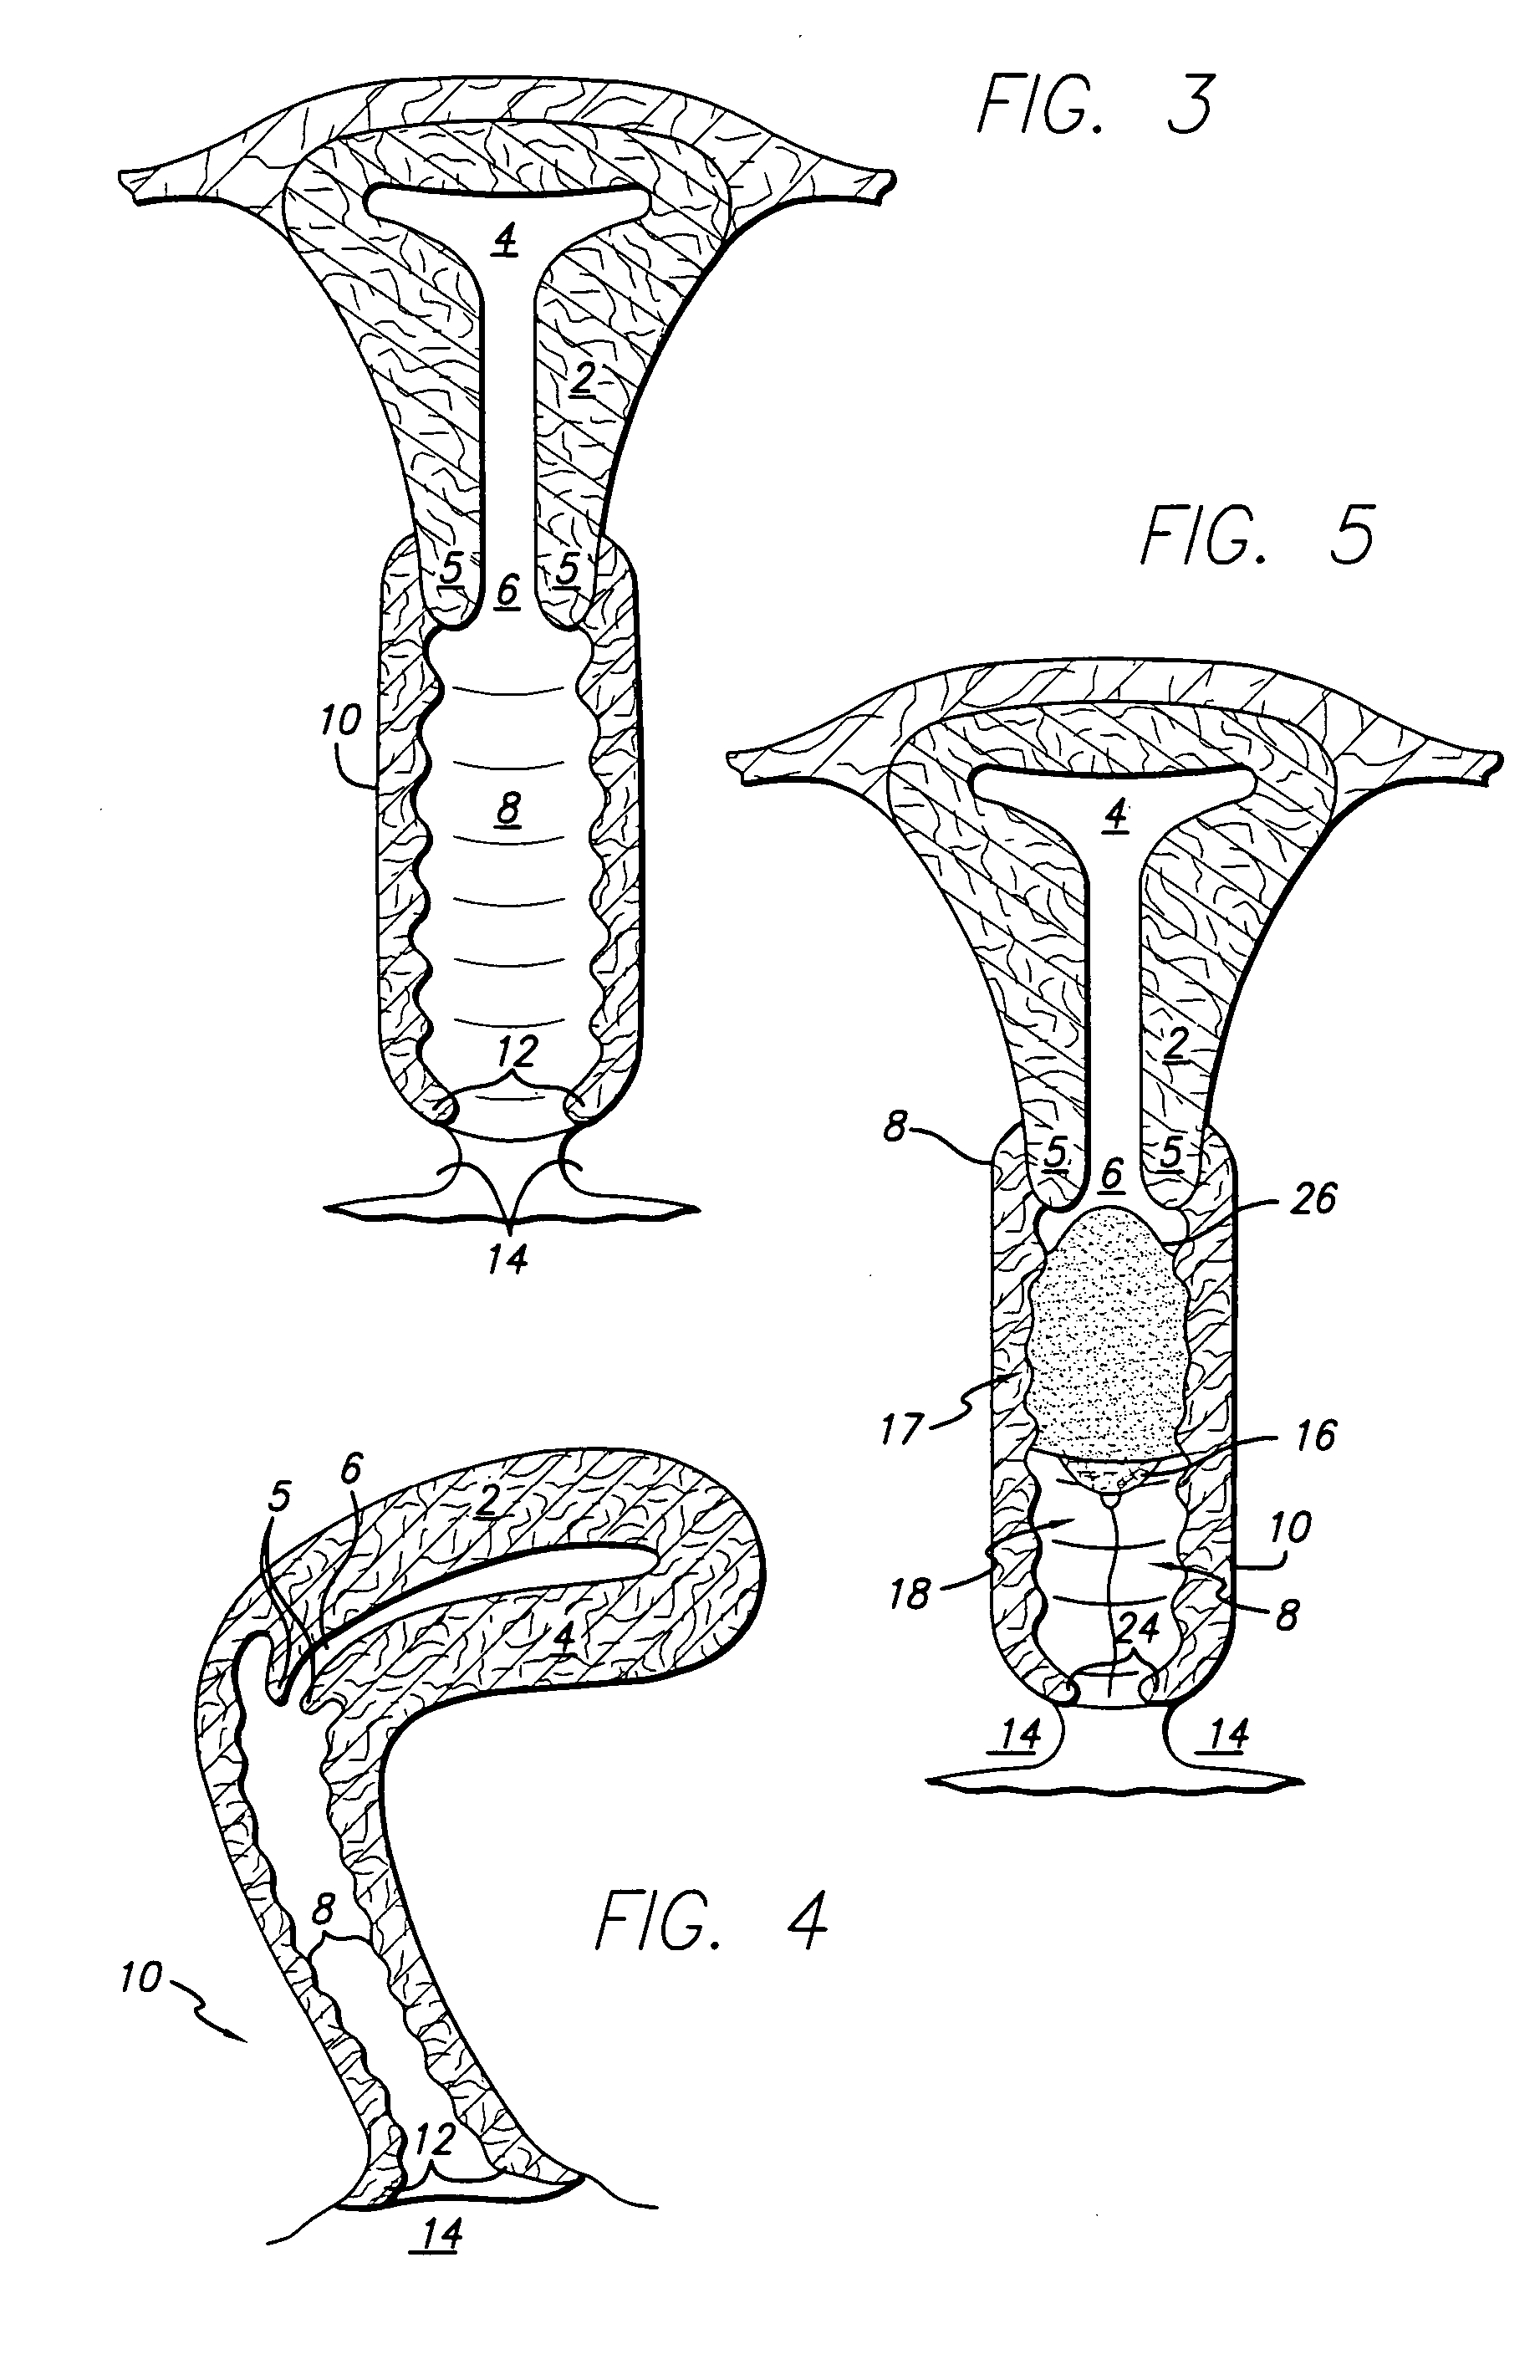 Coated vaginal device for delivery of anti-migraine and anti-nausea drugs and a method for treatment of migraine and nausea